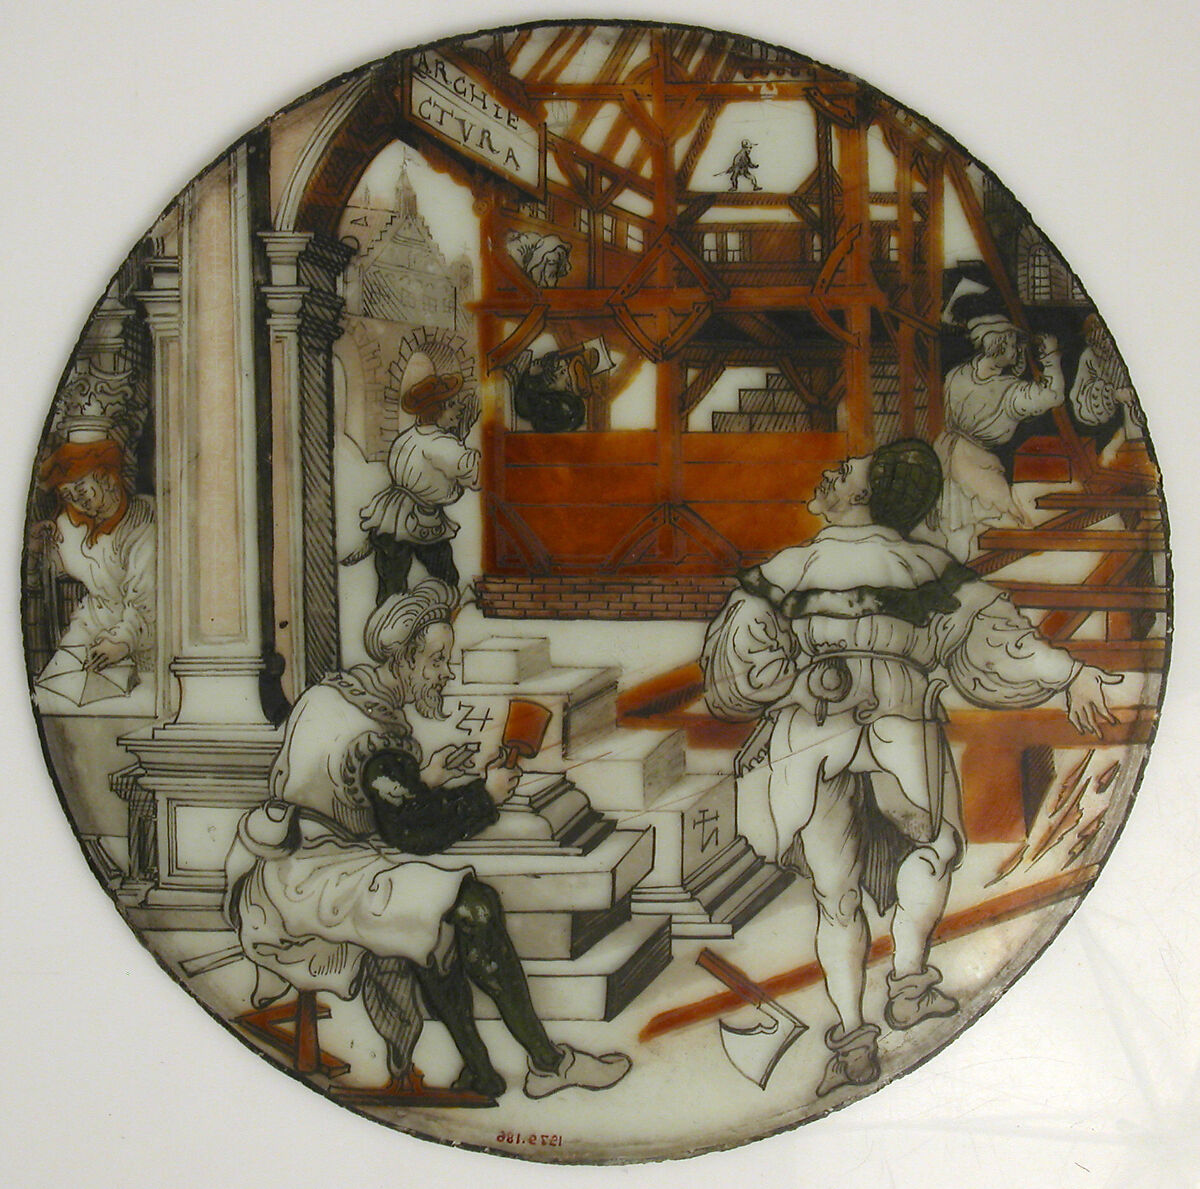 Roundel with Architecture (from a series of The Septem Artes Mechanicae), After Monogrammist SZ (German, active 16th century), Colorless glass, silver stain and vitreous paint, German 